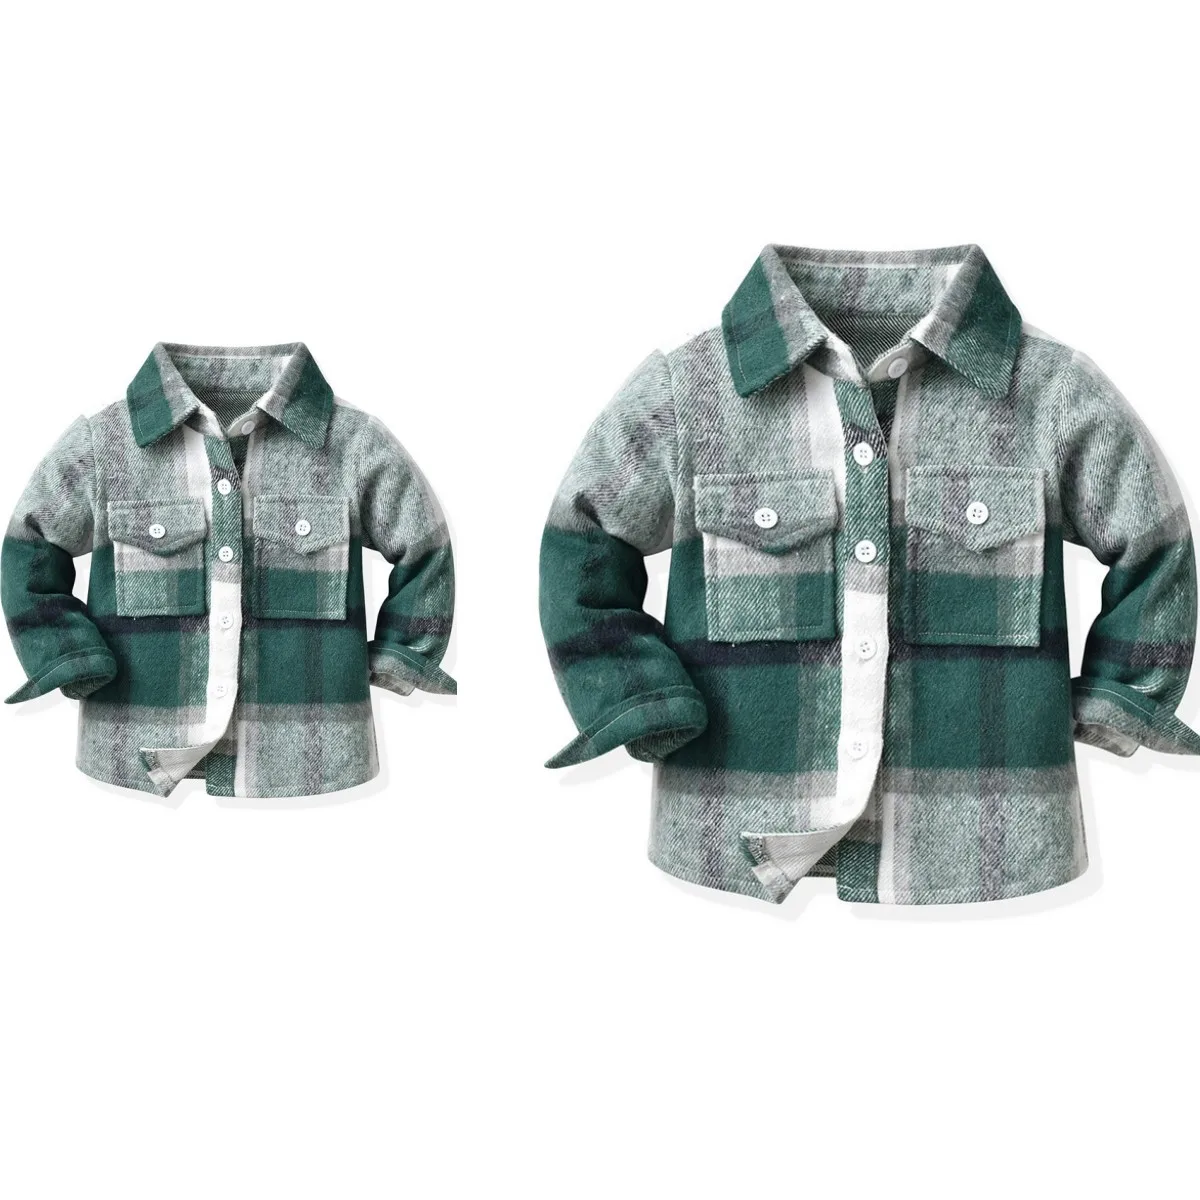 Children's Clothing Green Christmas Family Matching Plaid Jacket Long Shirts Mom Dad and Me Boy GIrl Outwear Coat Woman Sisters Brothers Sweatshirt